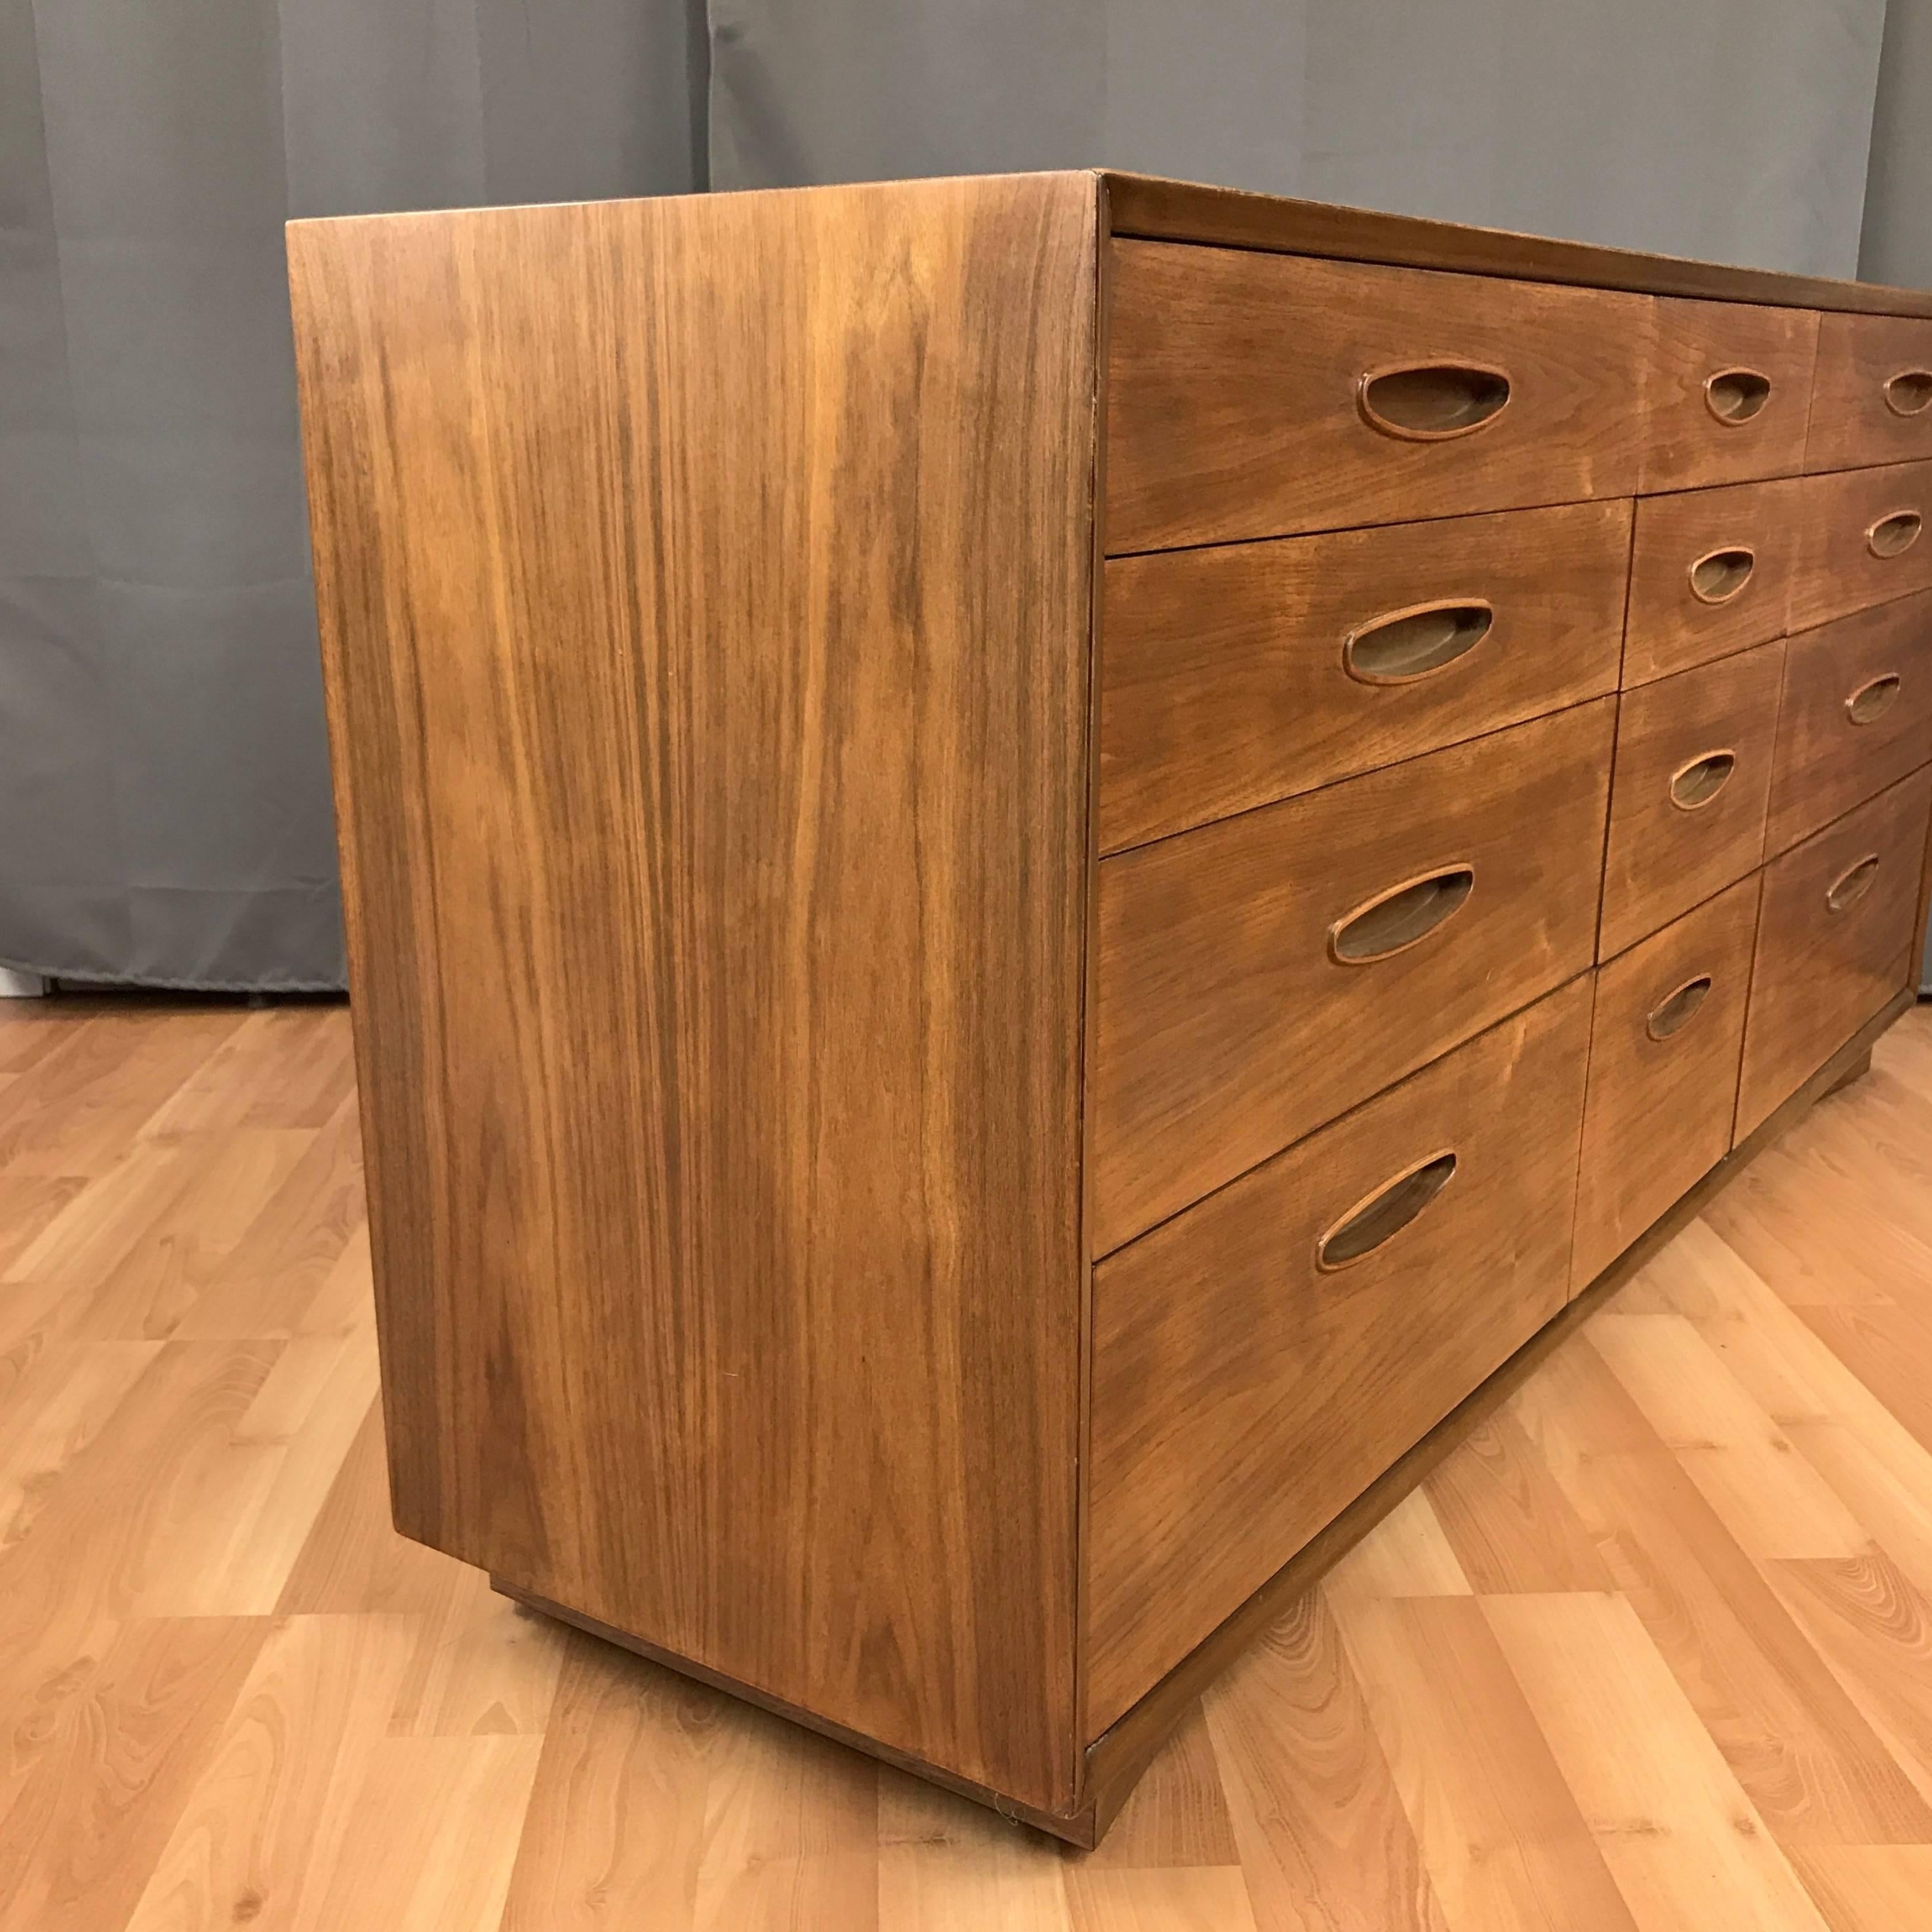 A twelve-drawer walnut dresser from Henredon’s mid-century modern “Circa ’60 Collection”.

Introduced in the 1950s, Henredon’s ads from that time described their forward-looking “Circa ’60 Collection” as being “designed to blend with any period